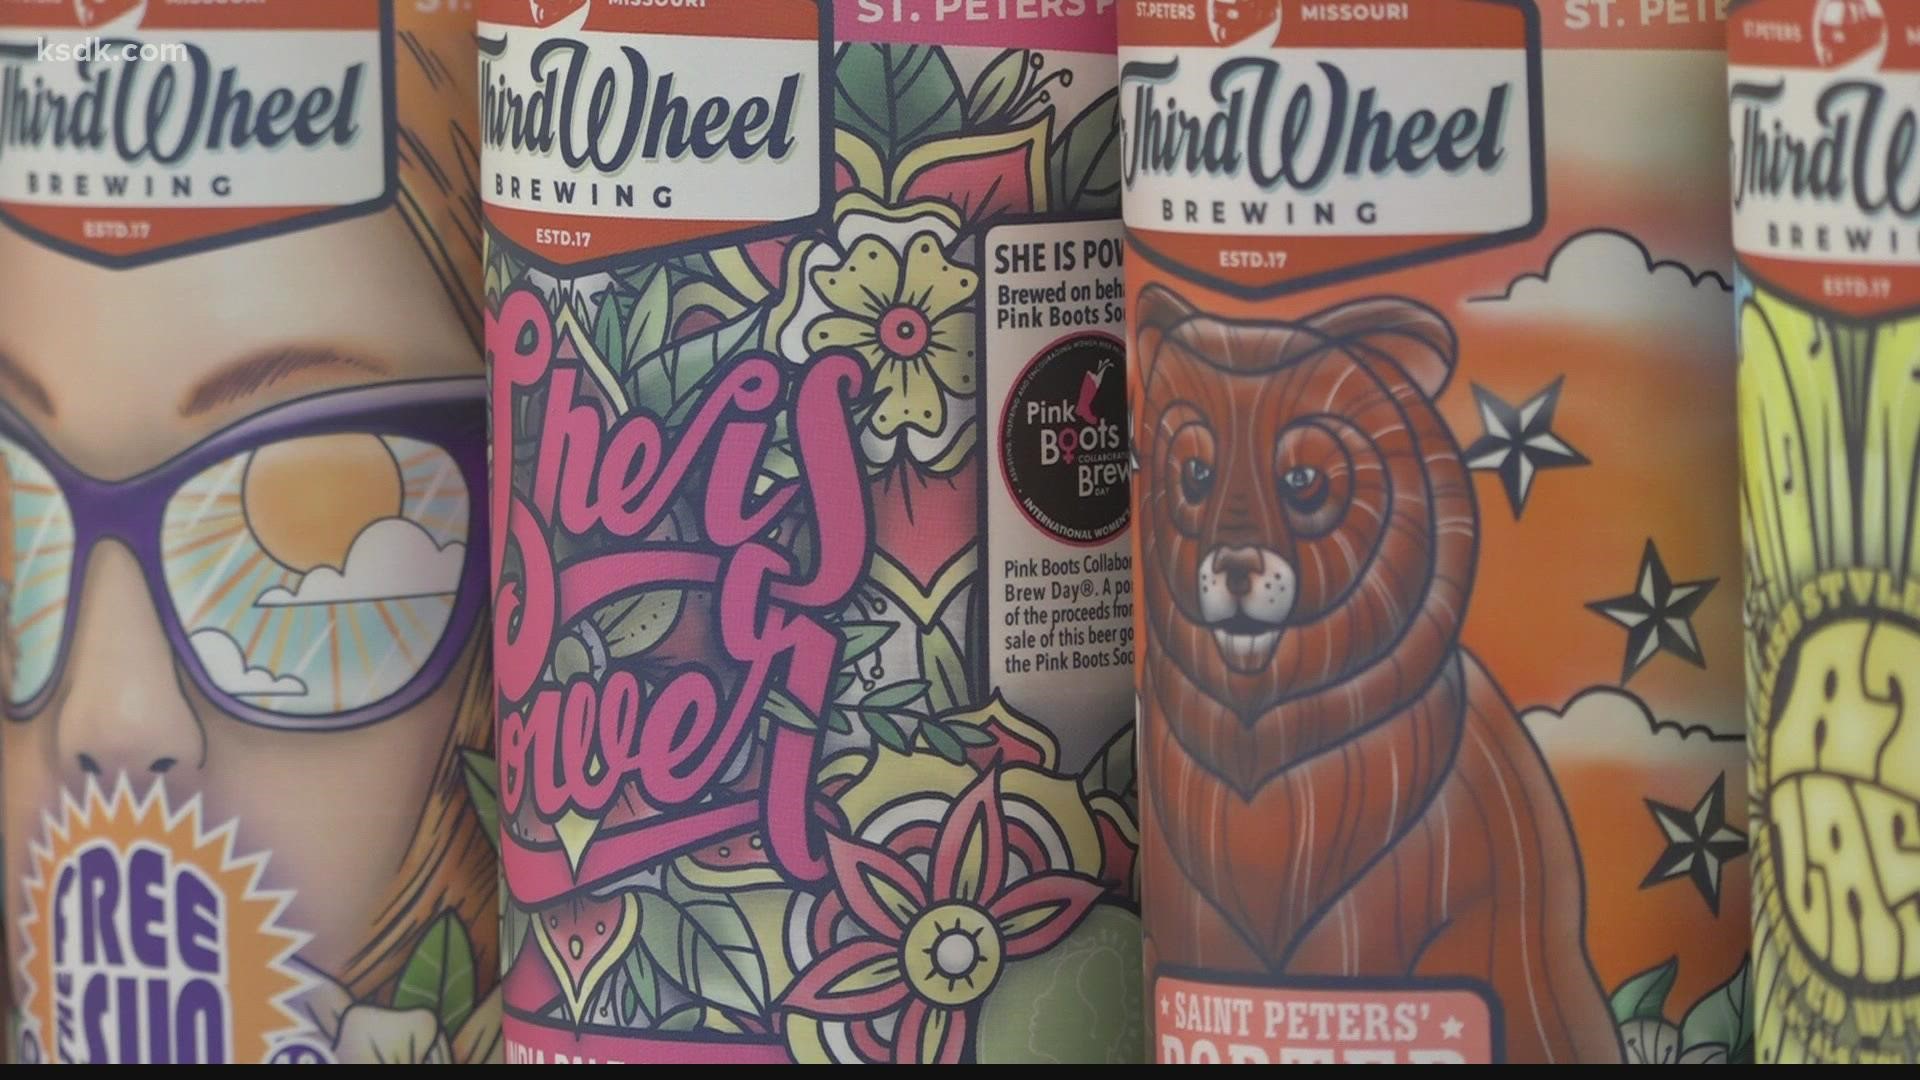 Have you ever looked closely at beer cans in the grocery store? It's where you'll see the detailed work of an artist in St. Charles.